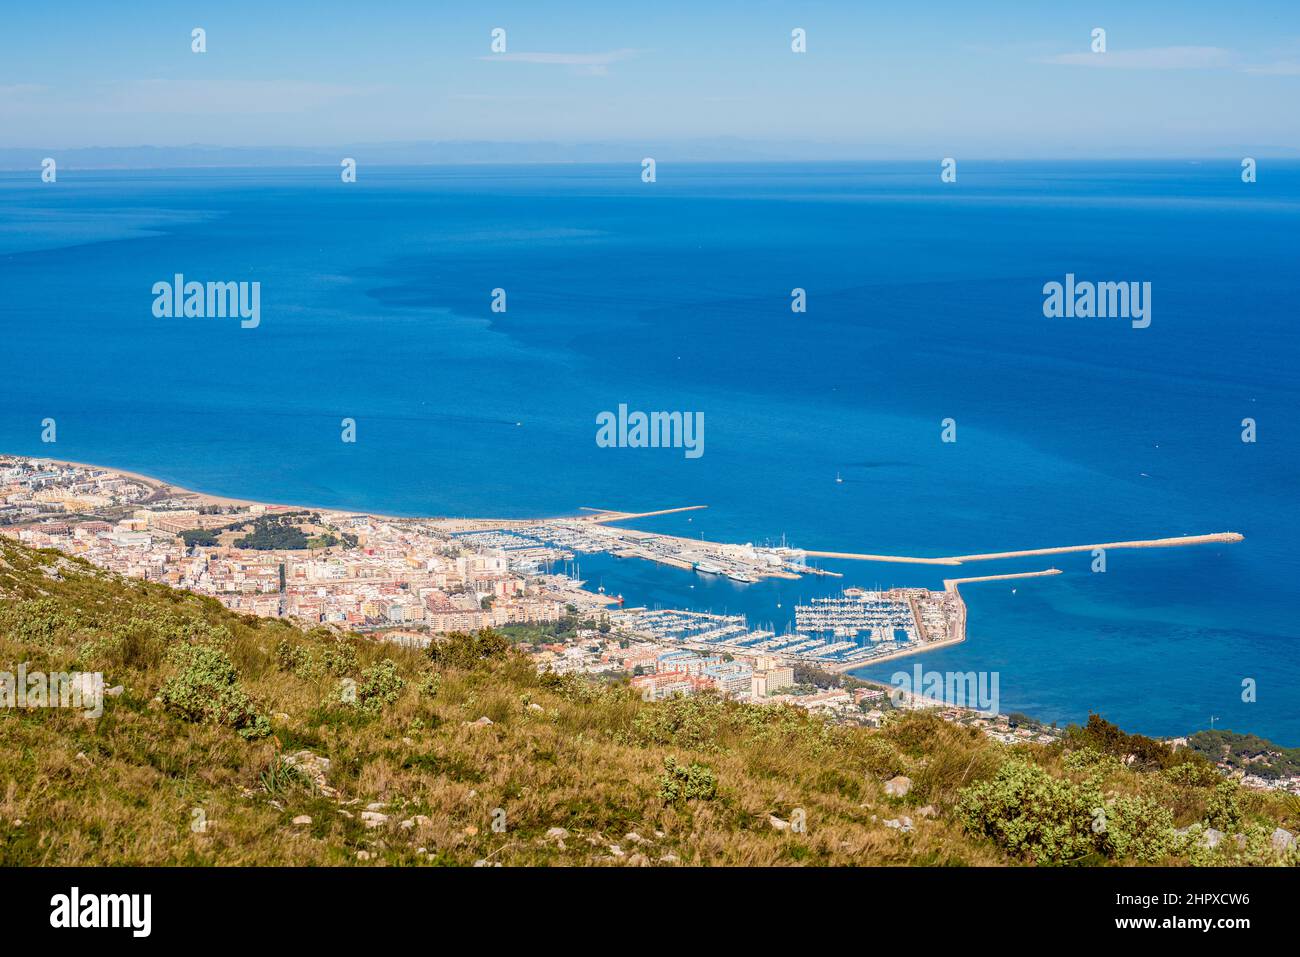 Scenic view of Dénia harbor from above in the Mediterranean Sea Stock Photo